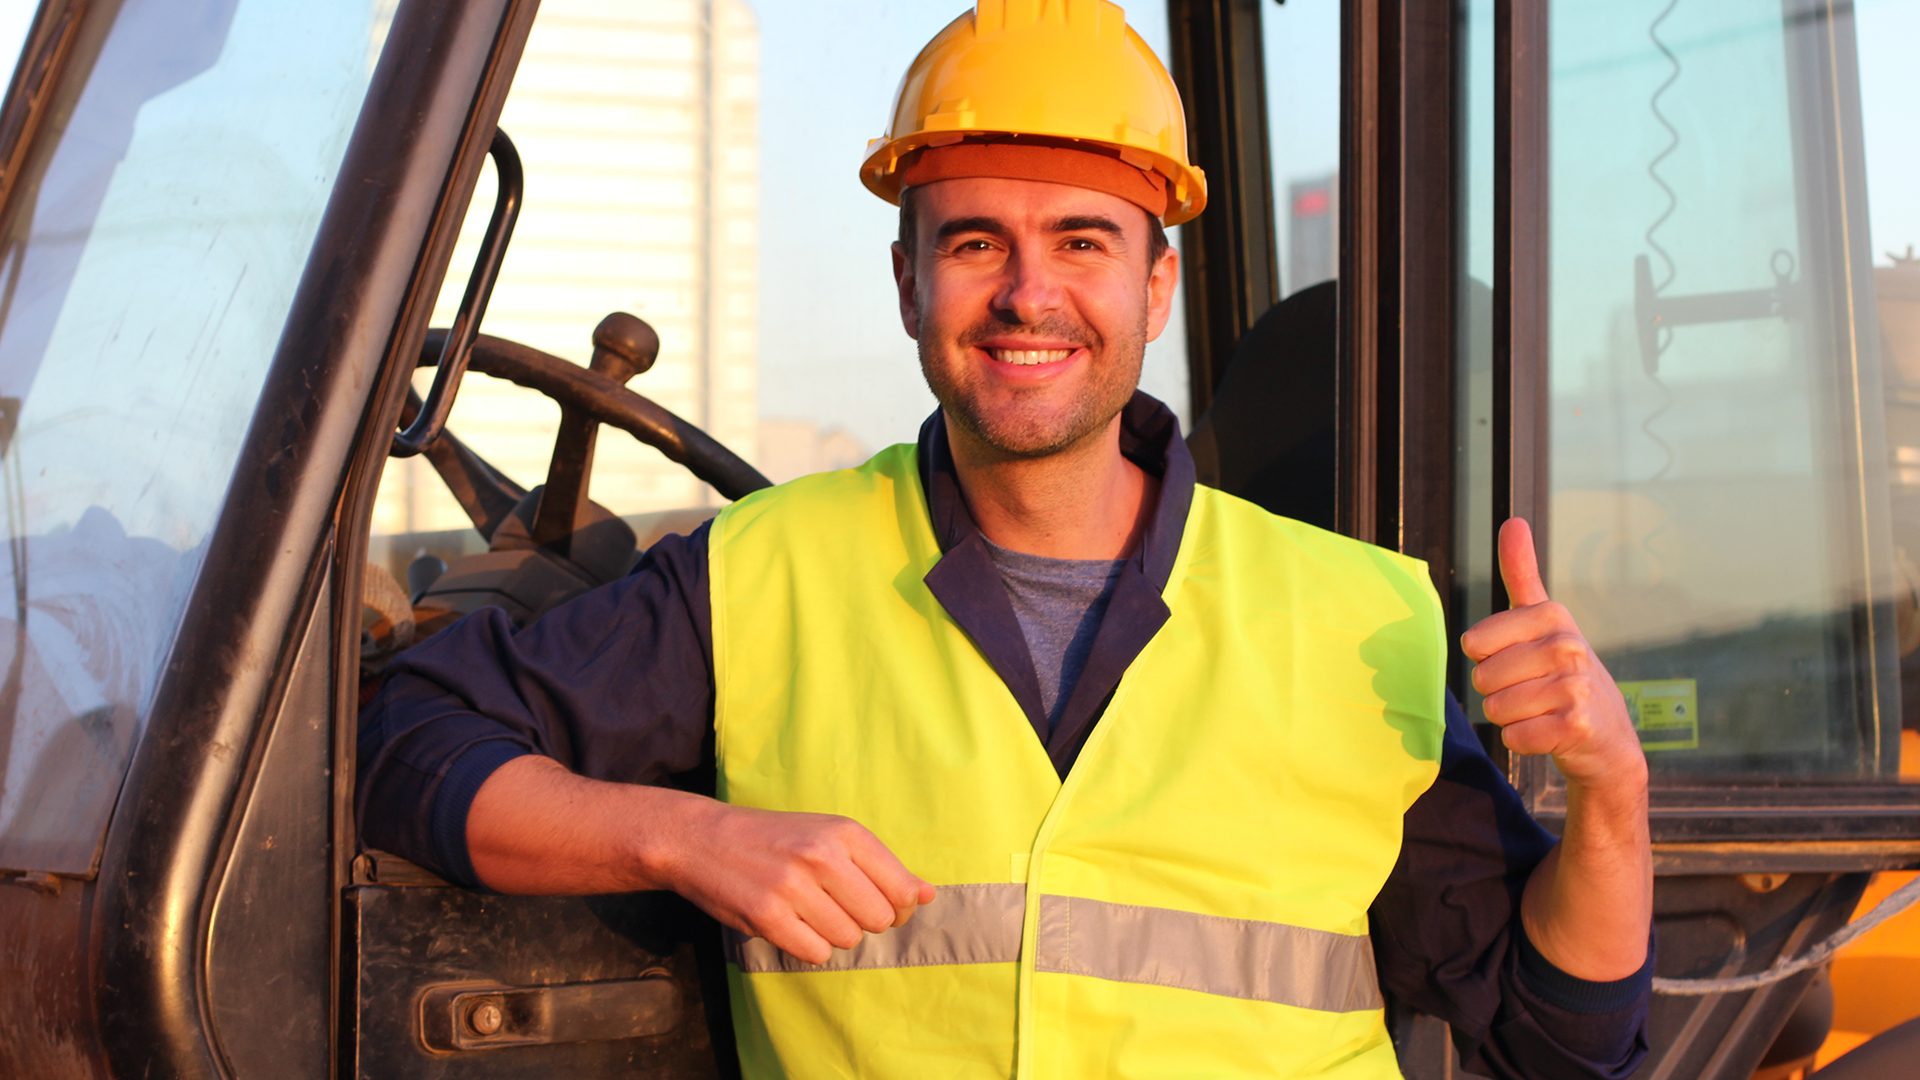 Closeup of a man in a safety vest smiling and giving a thumbs up